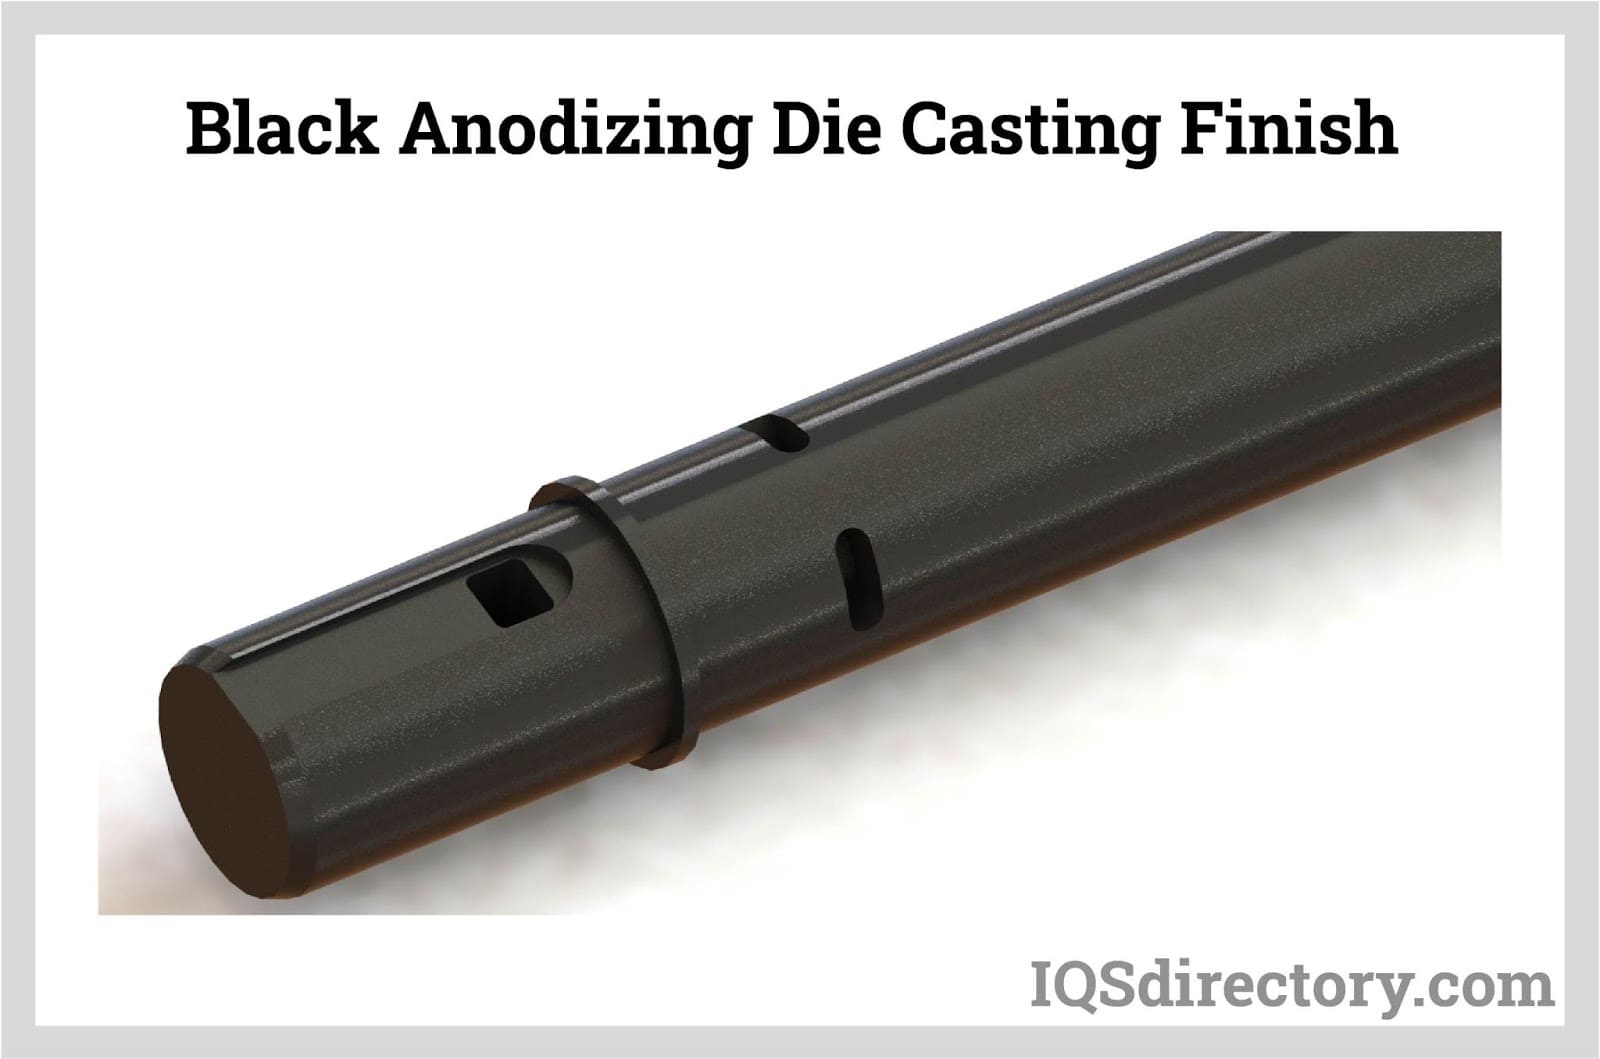 Black Anodizing Die asting Finish